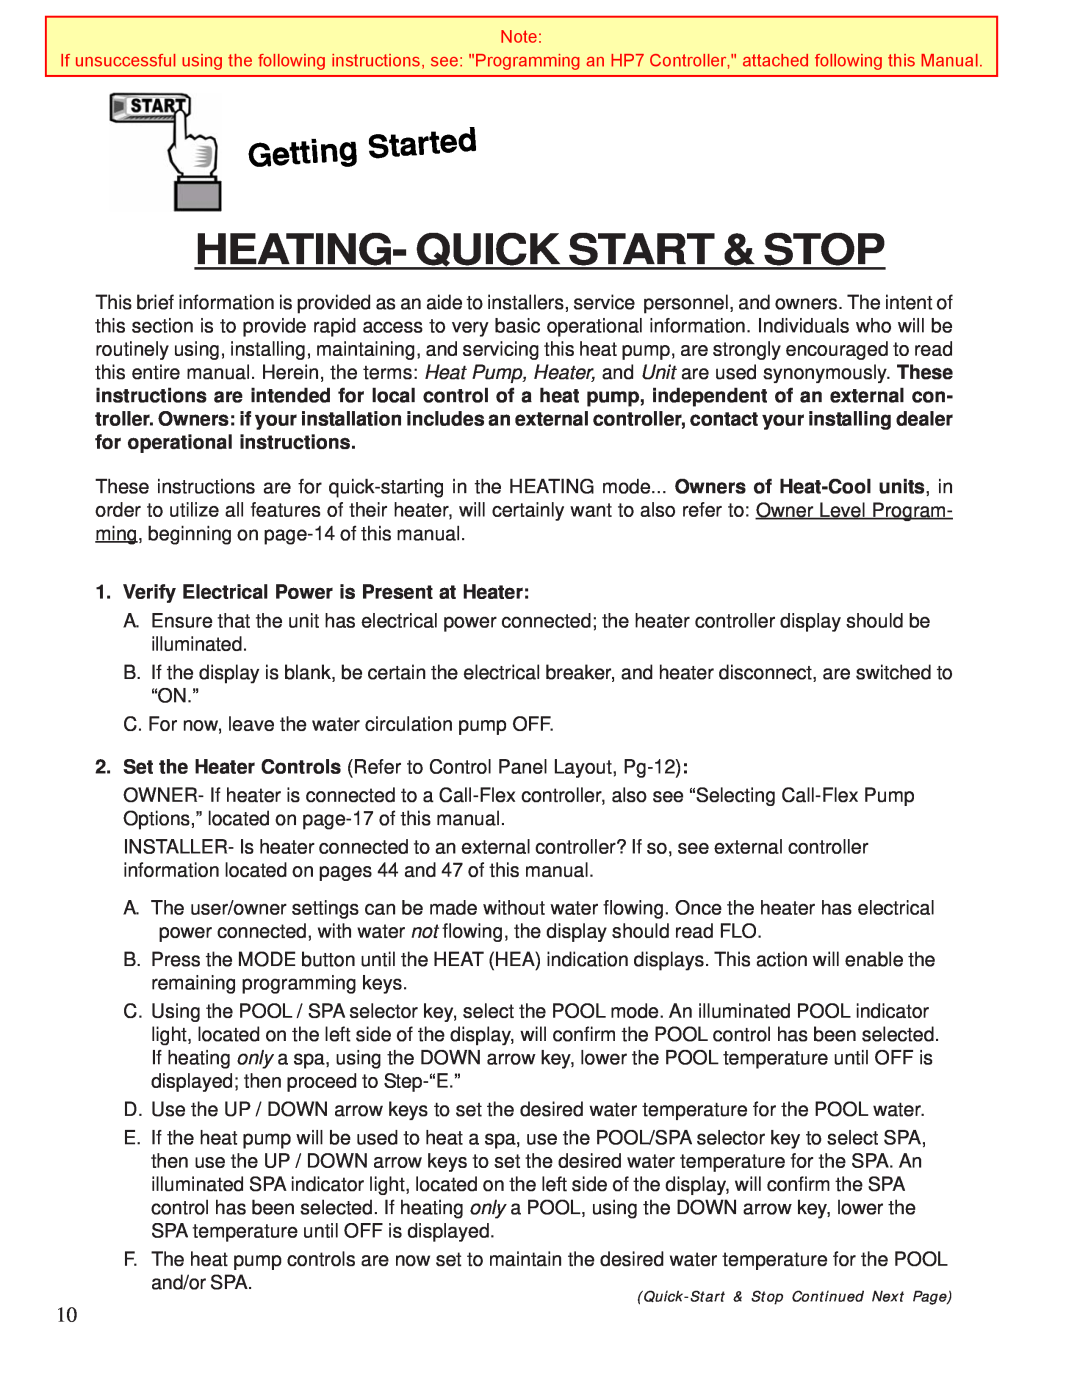 Aquacal 155, 120 owner manual Heating- Quick Start & Stop, Verify Electrical Power is Present at Heater 